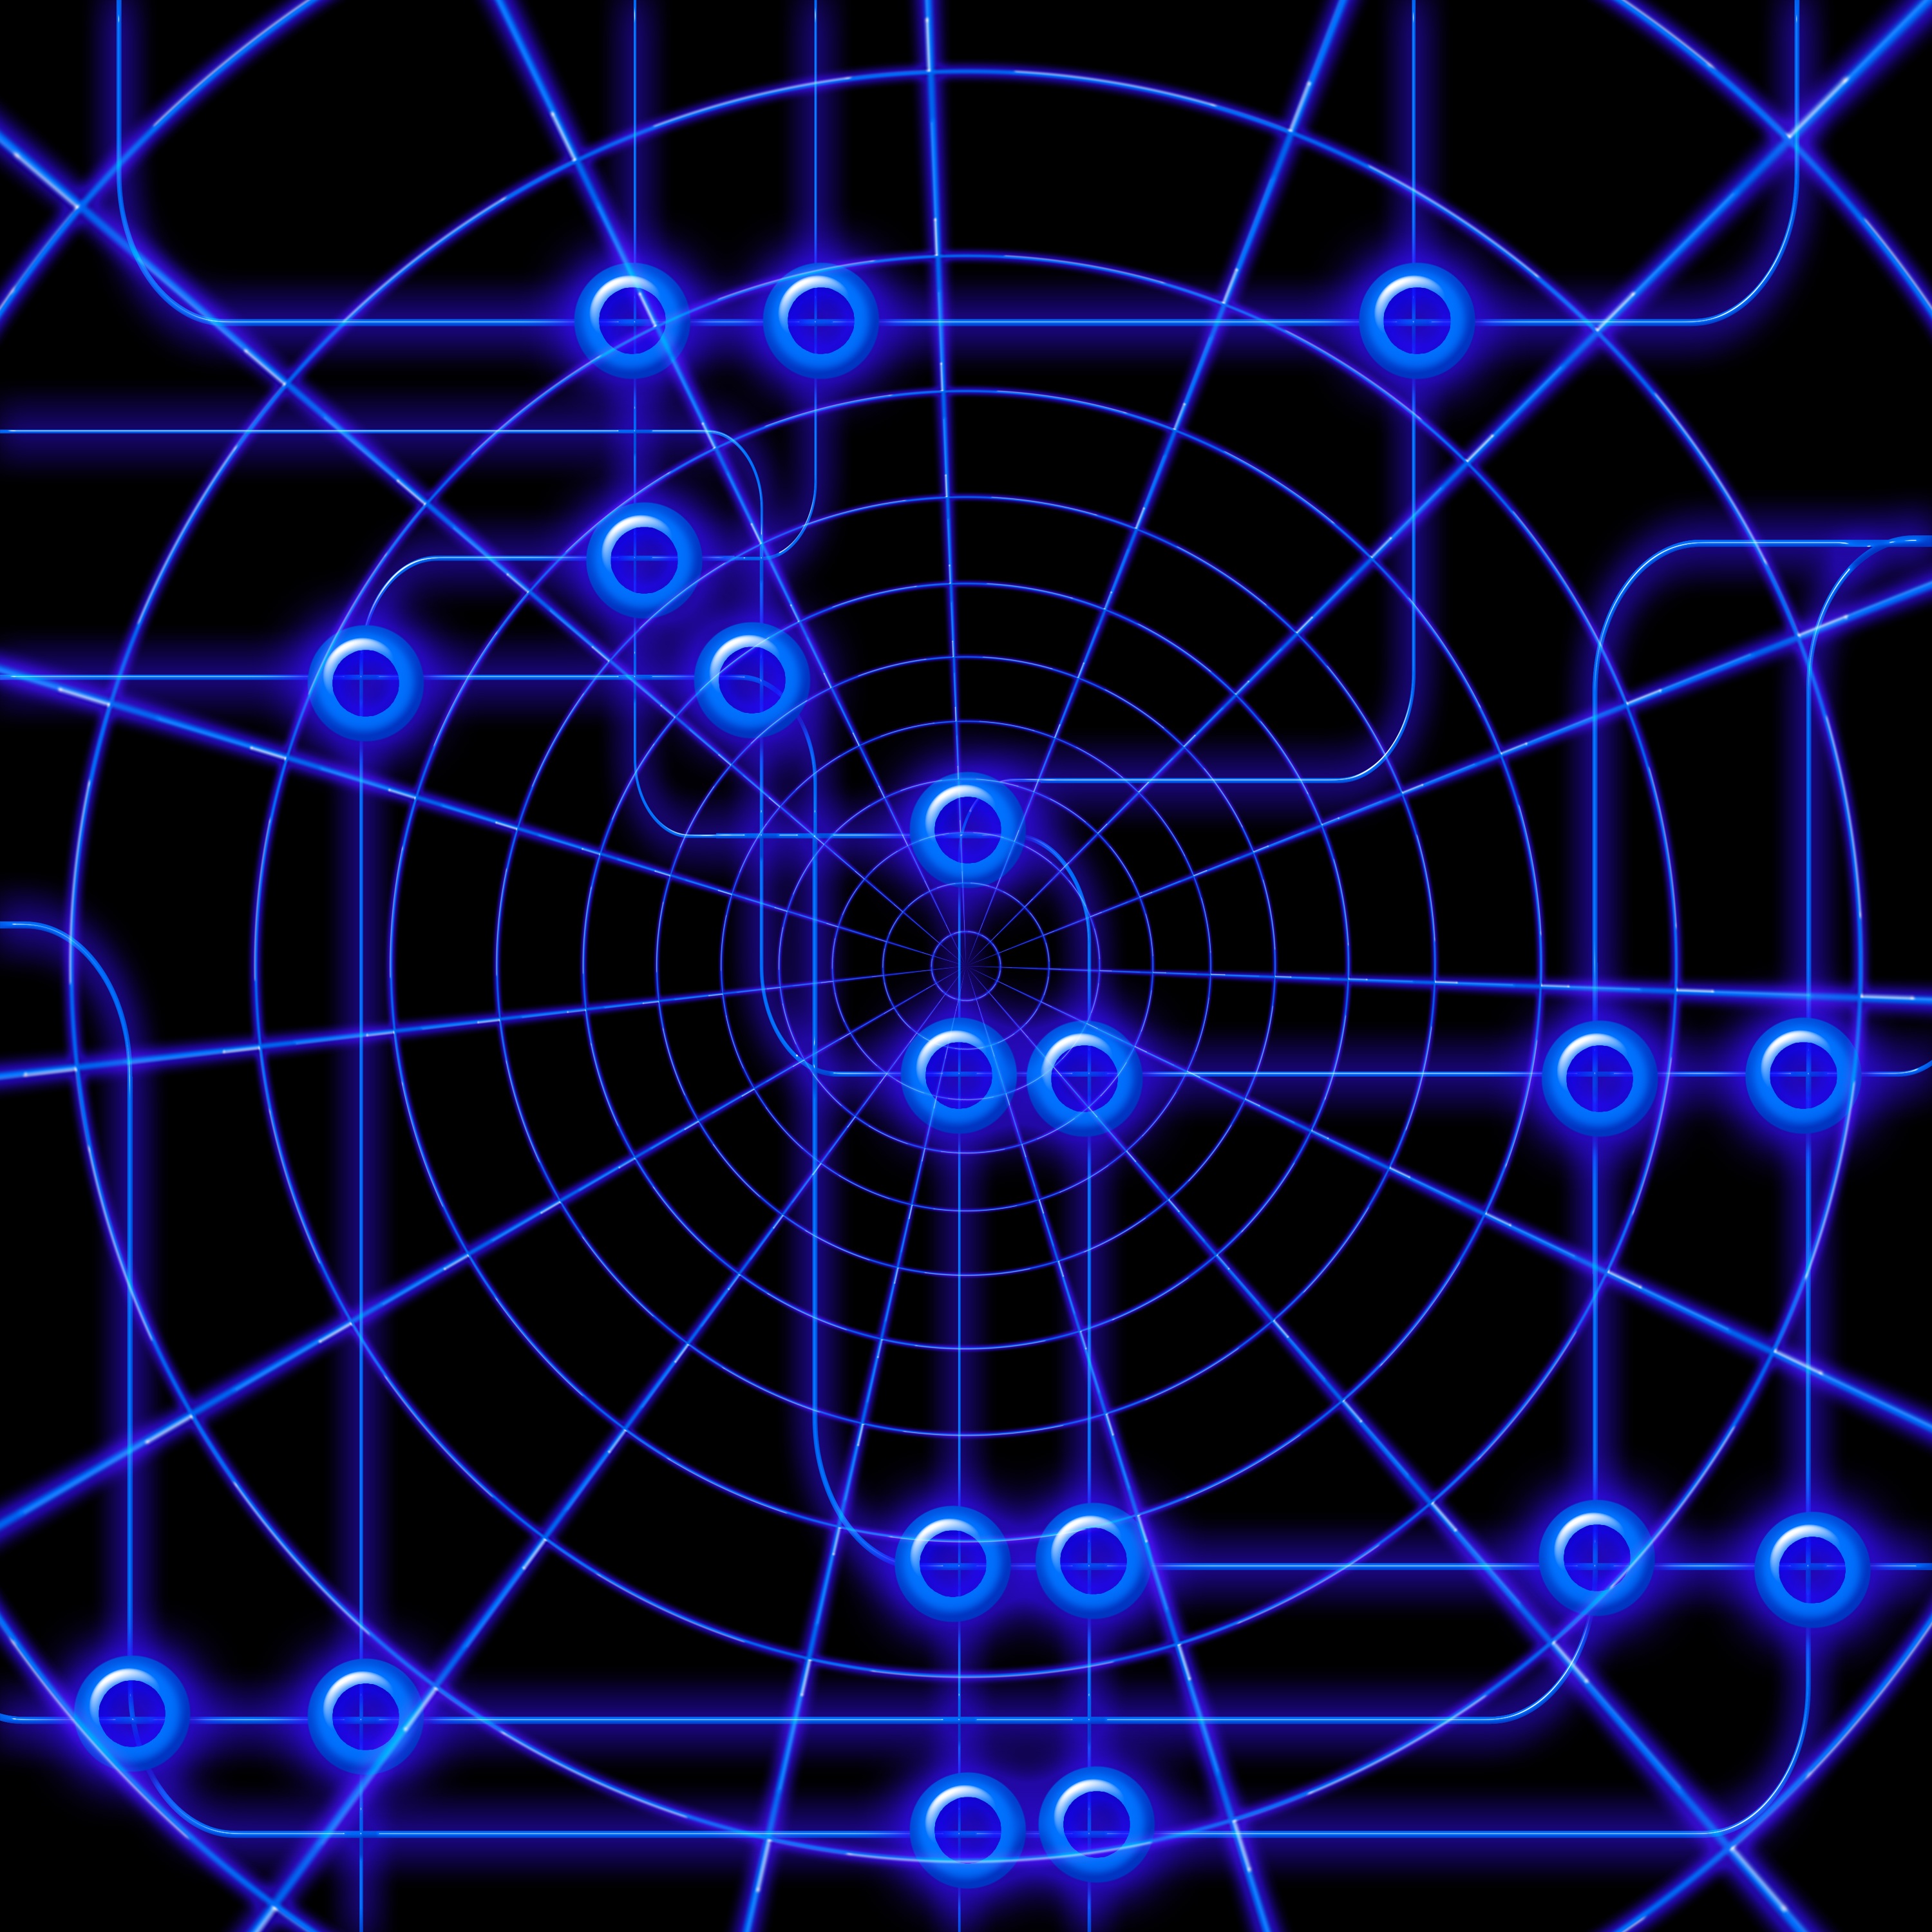 3d, connections, connection, weaving, net, schemes, circuitry cell phone wallpapers